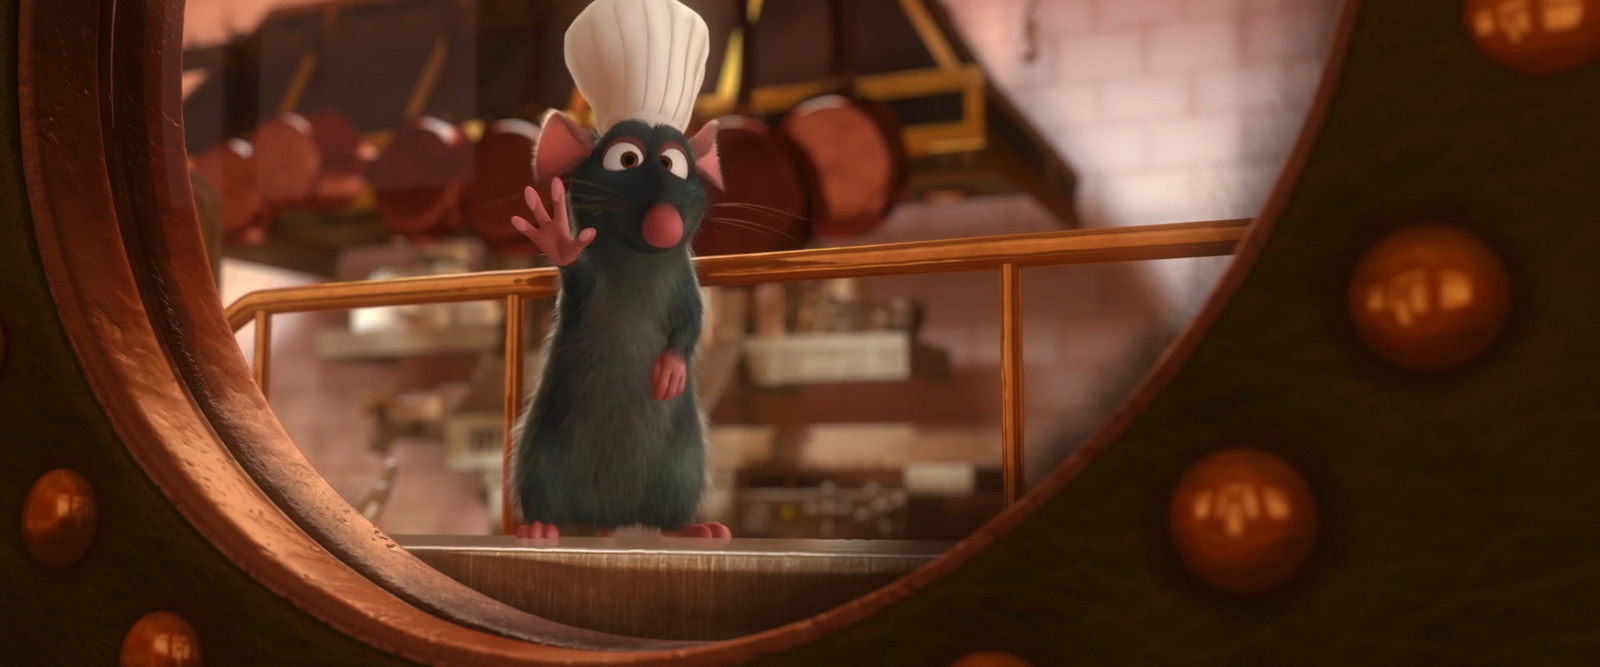 In the first corner we have Remy, from Ratatouille. 